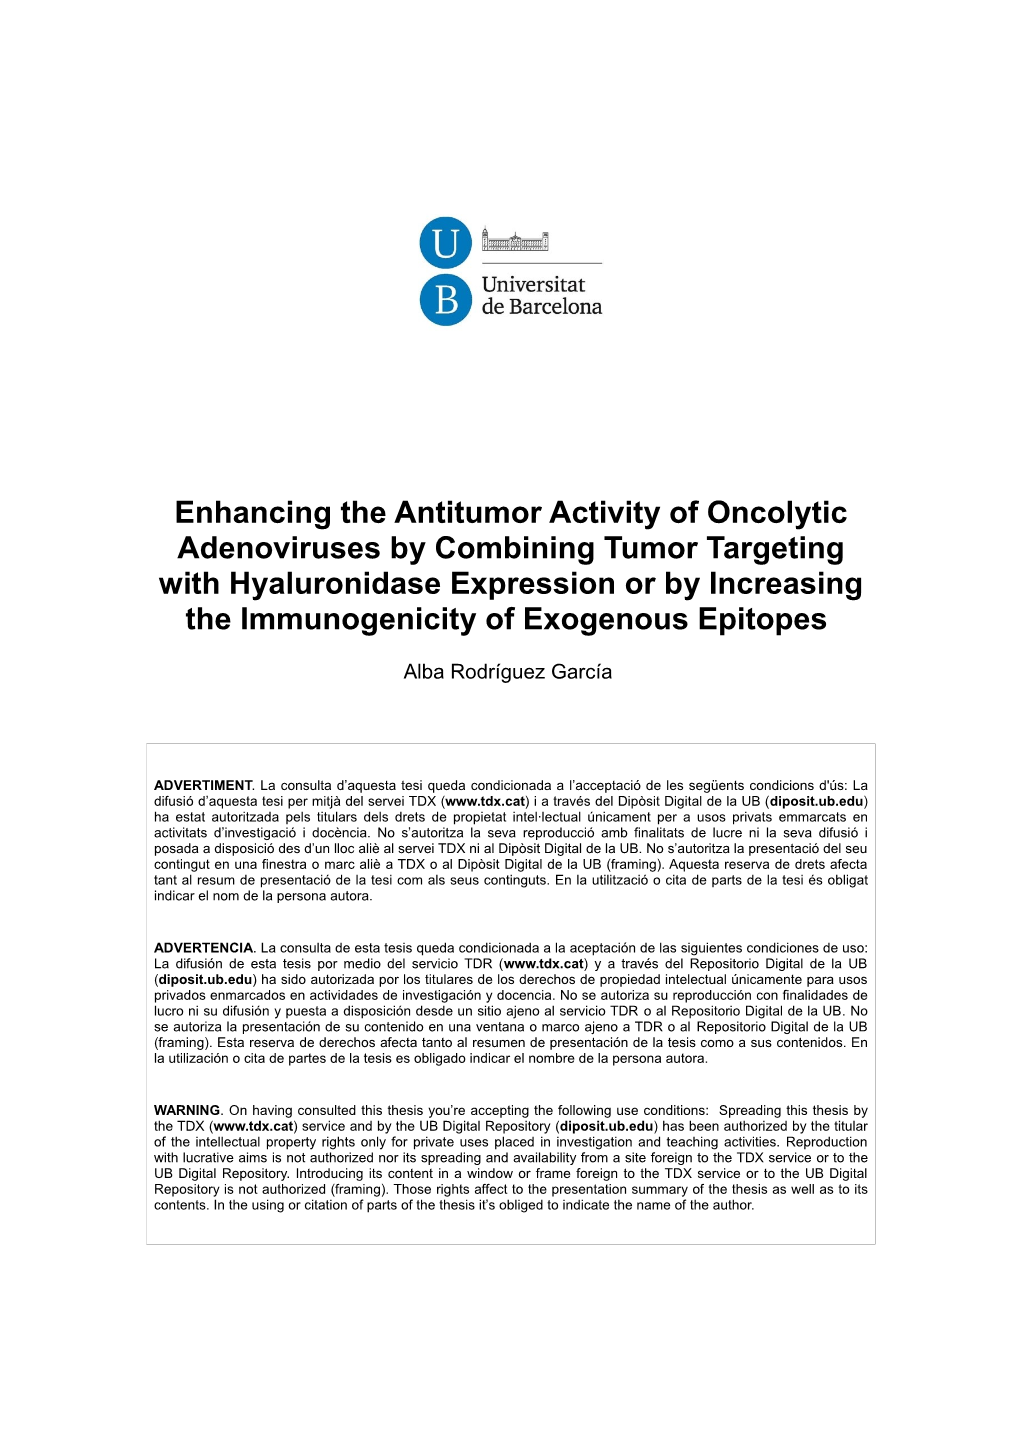 Enhancing the Antitumor Activity of Oncolytic Adenoviruses By